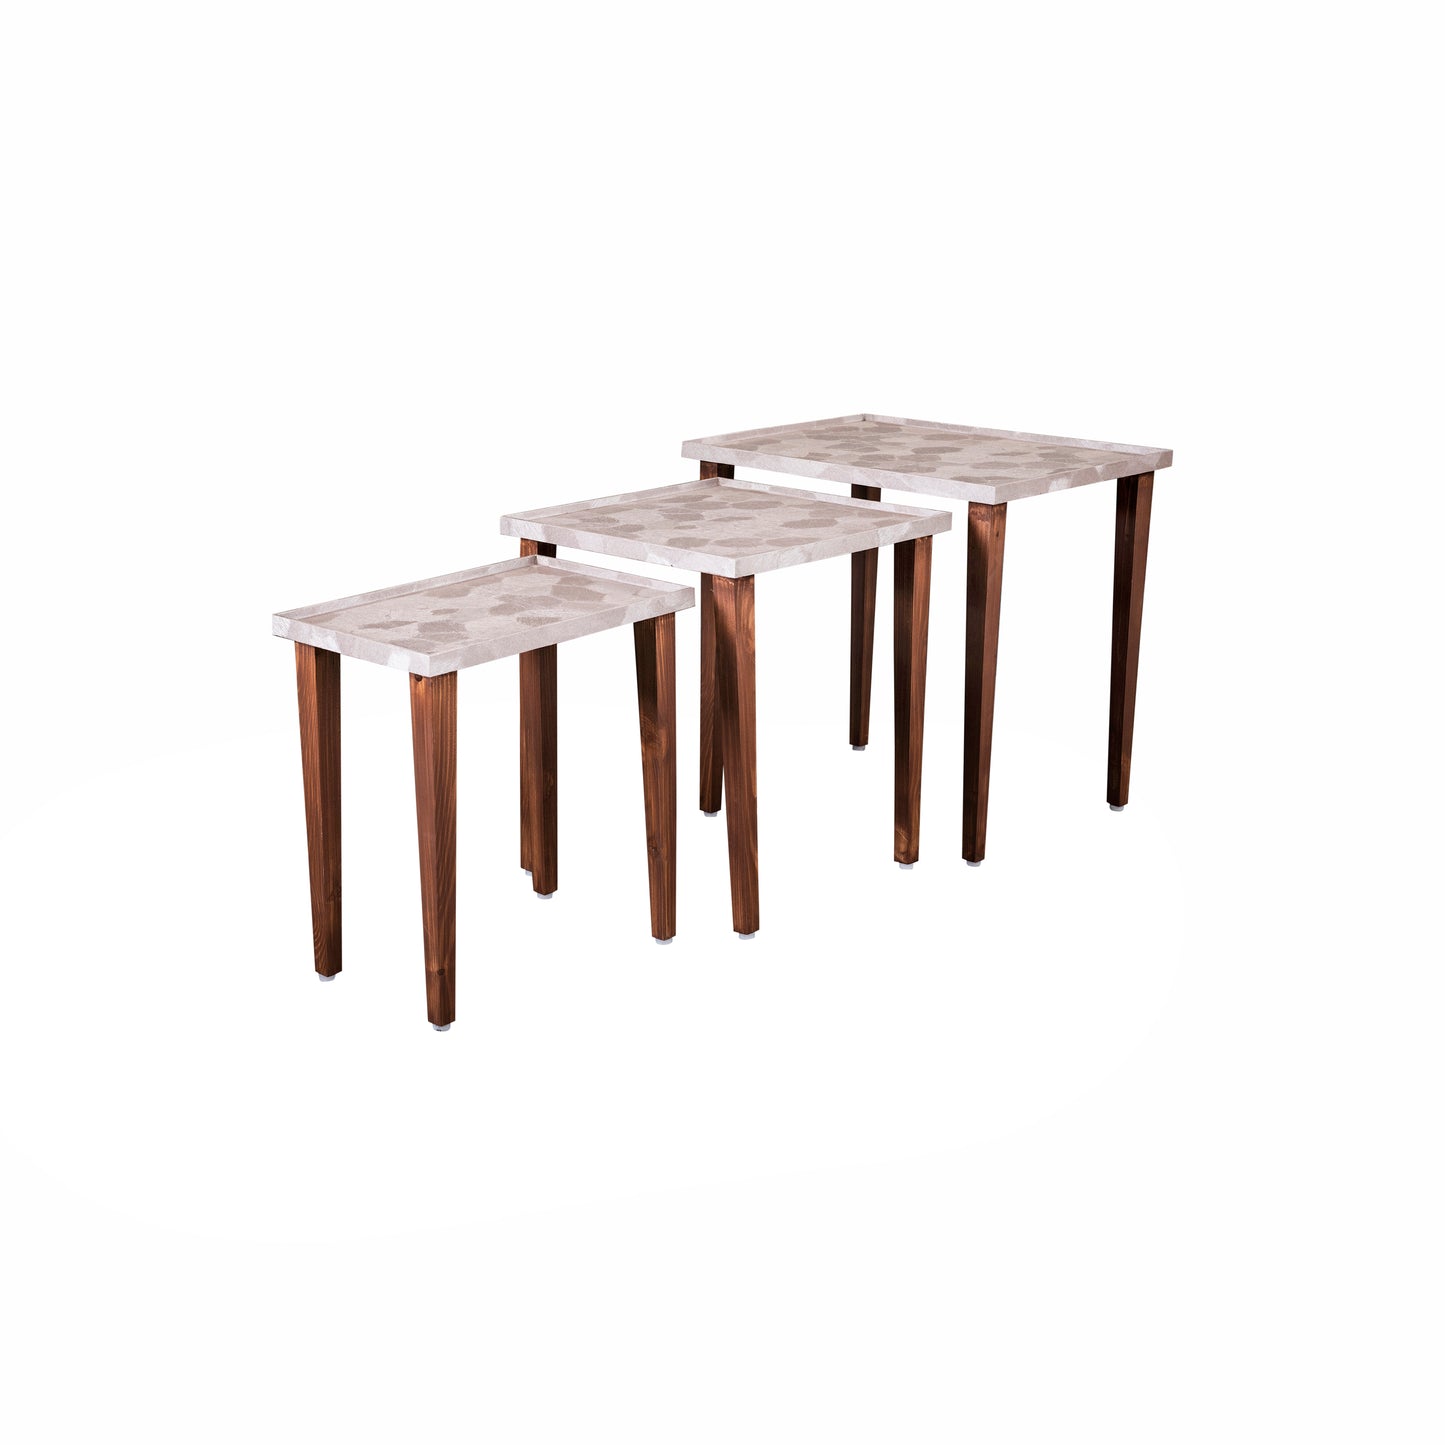 A Tiny Mistake Allure Rose Gold Wooden Rectangle Nesting Tables (Set of 3), Living Room Decor